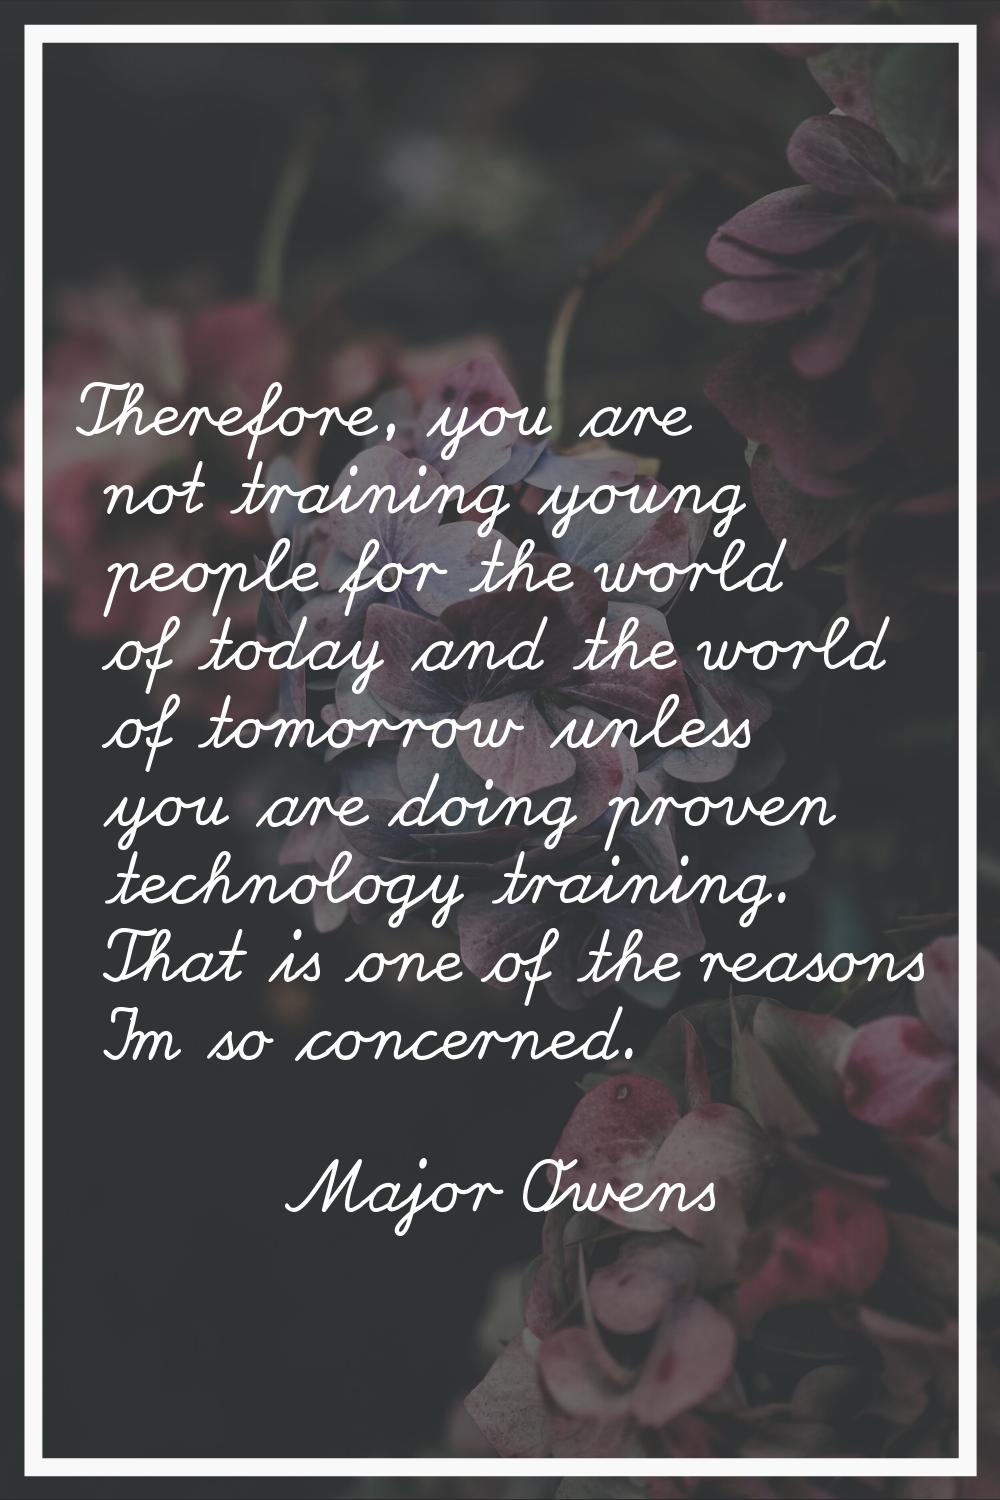 Therefore, you are not training young people for the world of today and the world of tomorrow unles